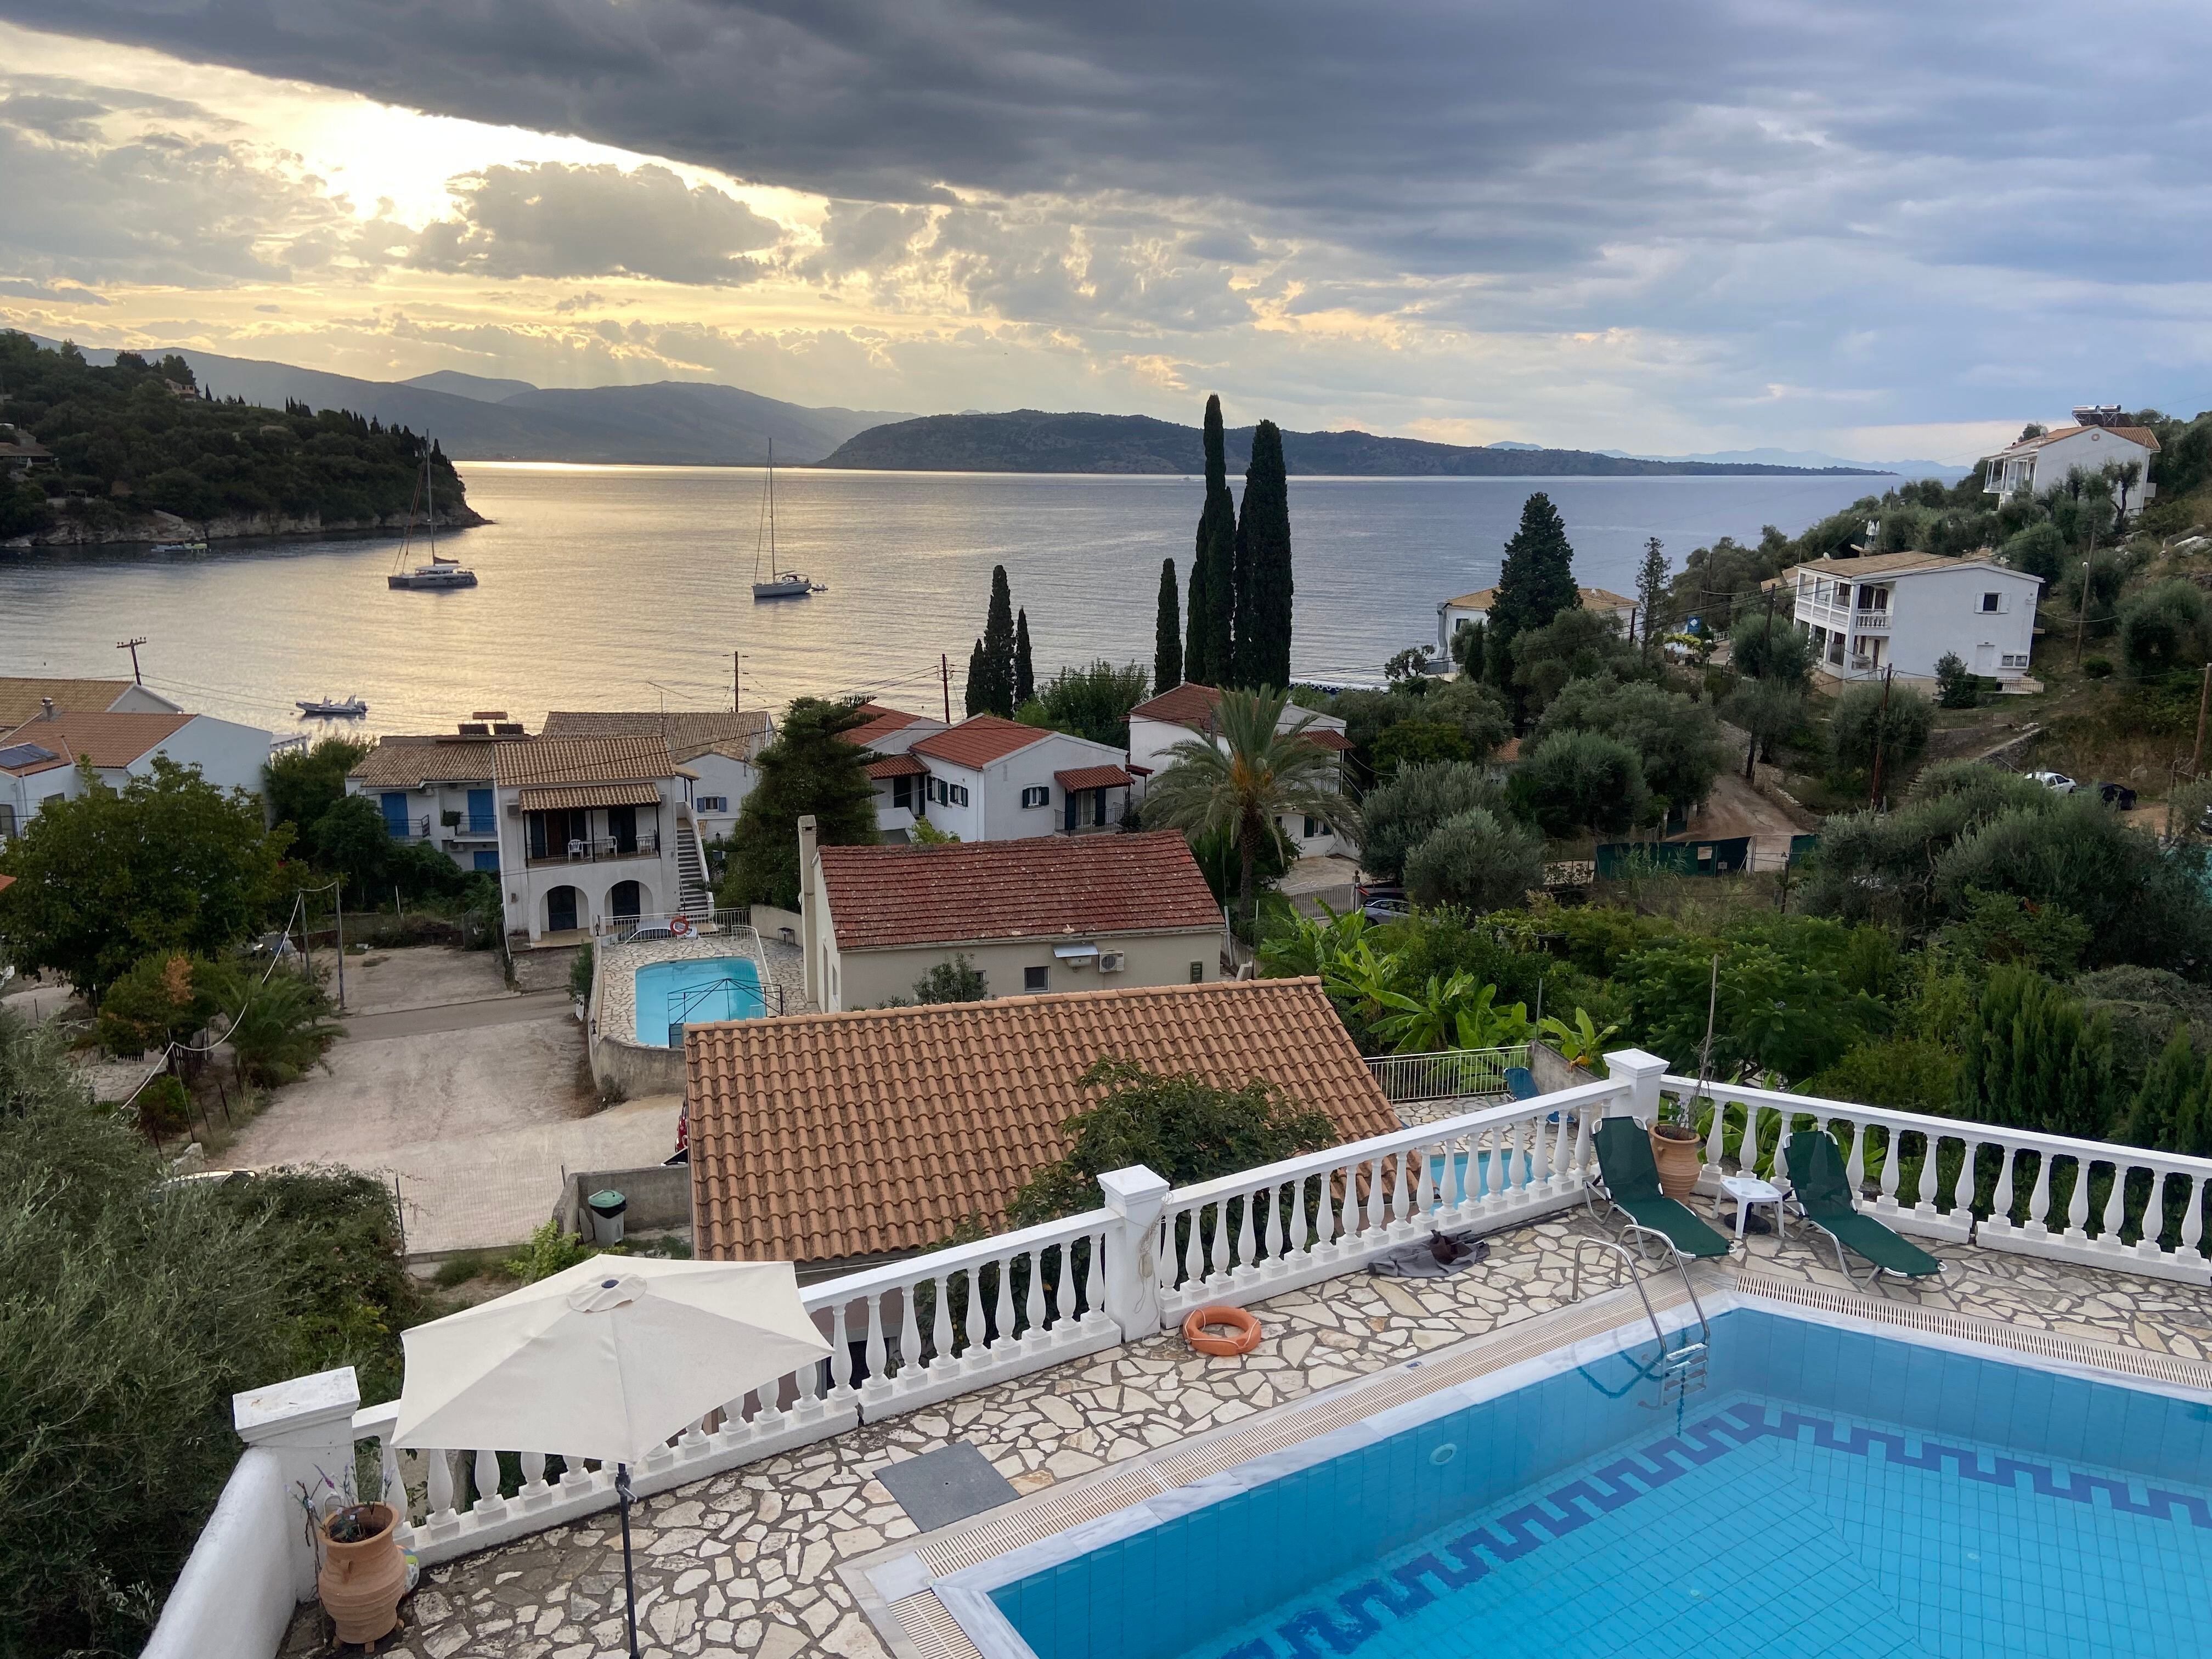 Travel review: The magical allure of Corfu